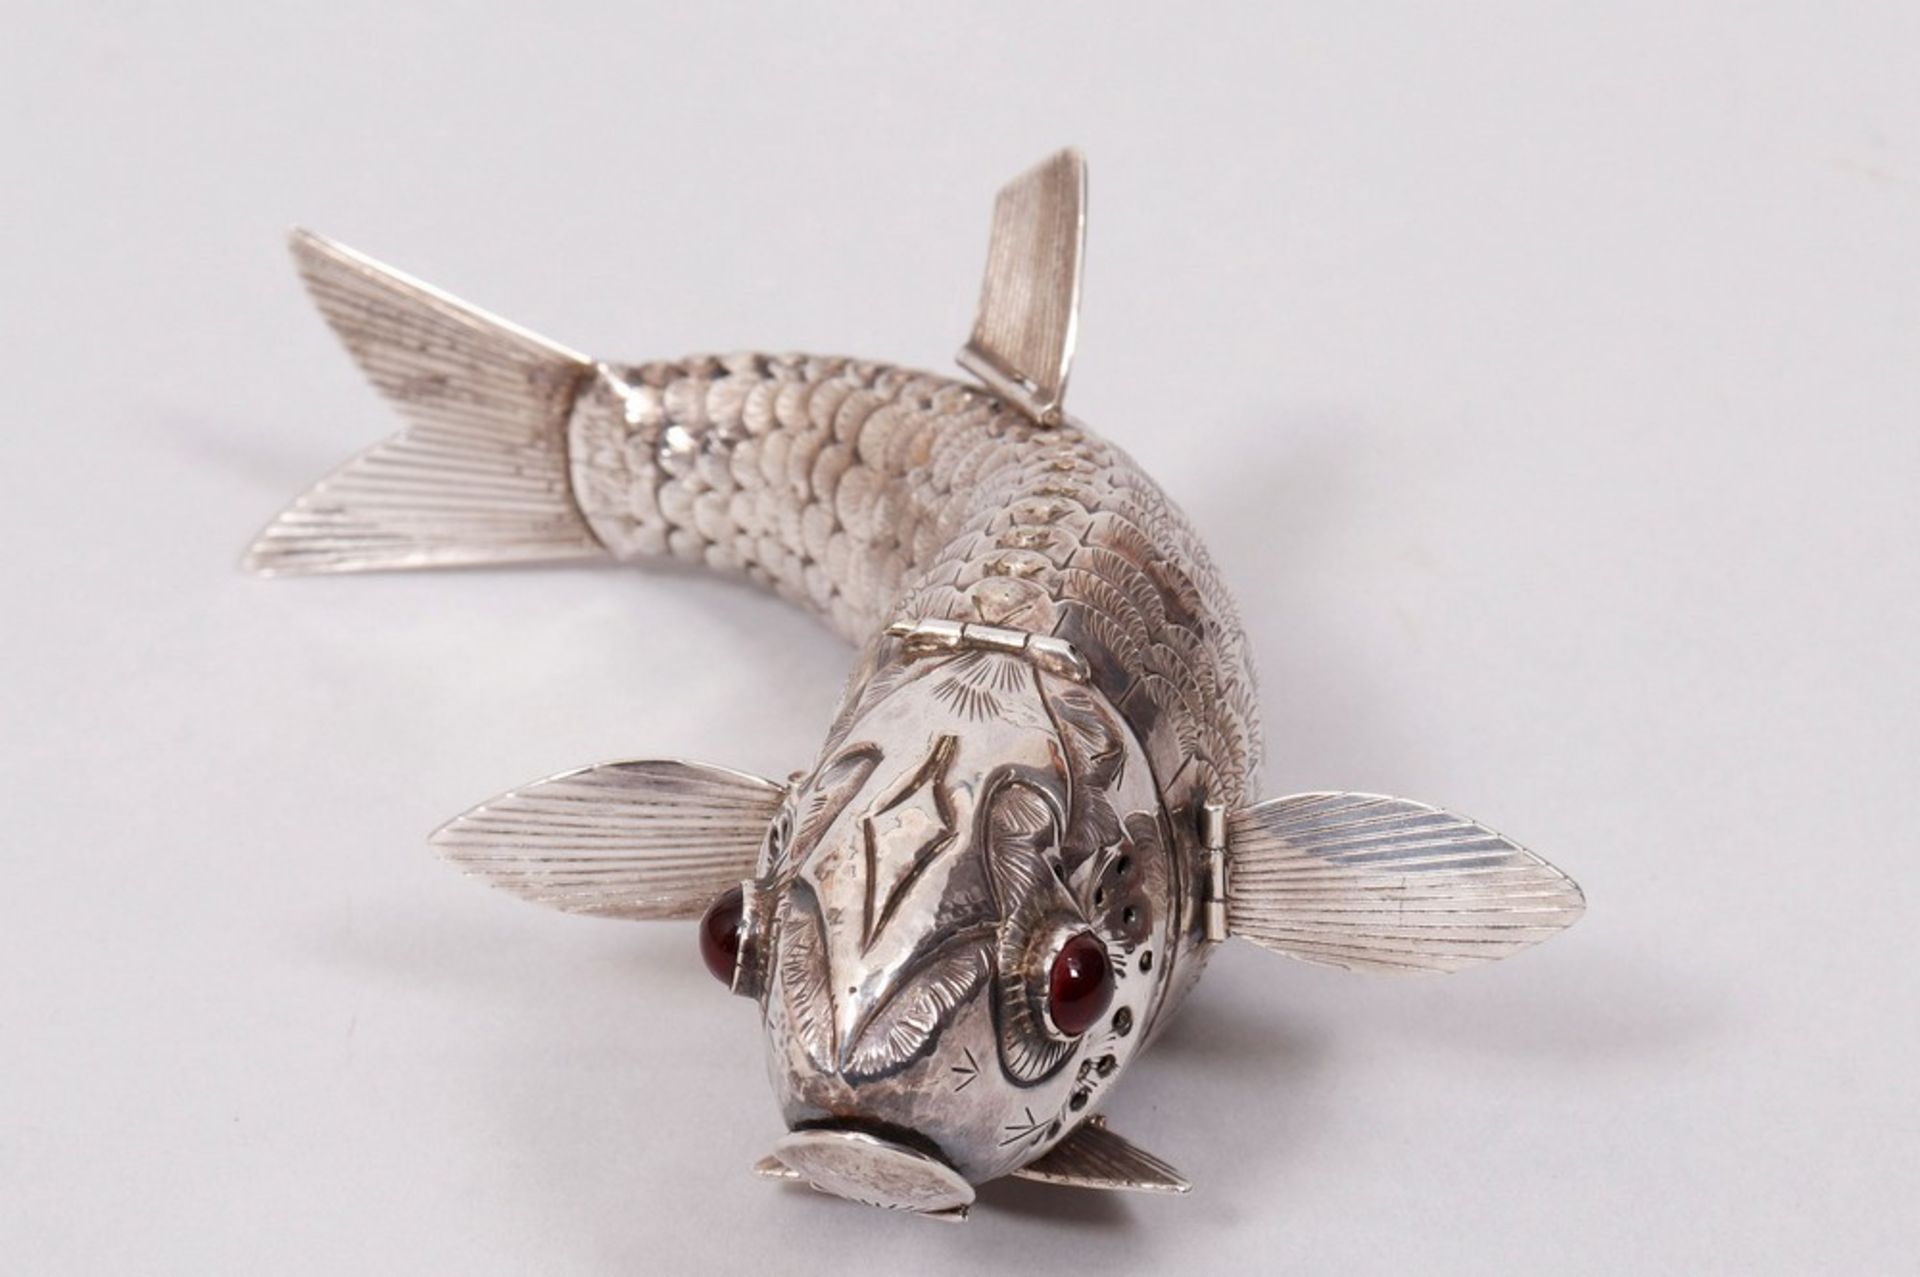 Besamim box in shape of a fish, 830 silver, probably Scandinavia, 19th C. - Image 3 of 7